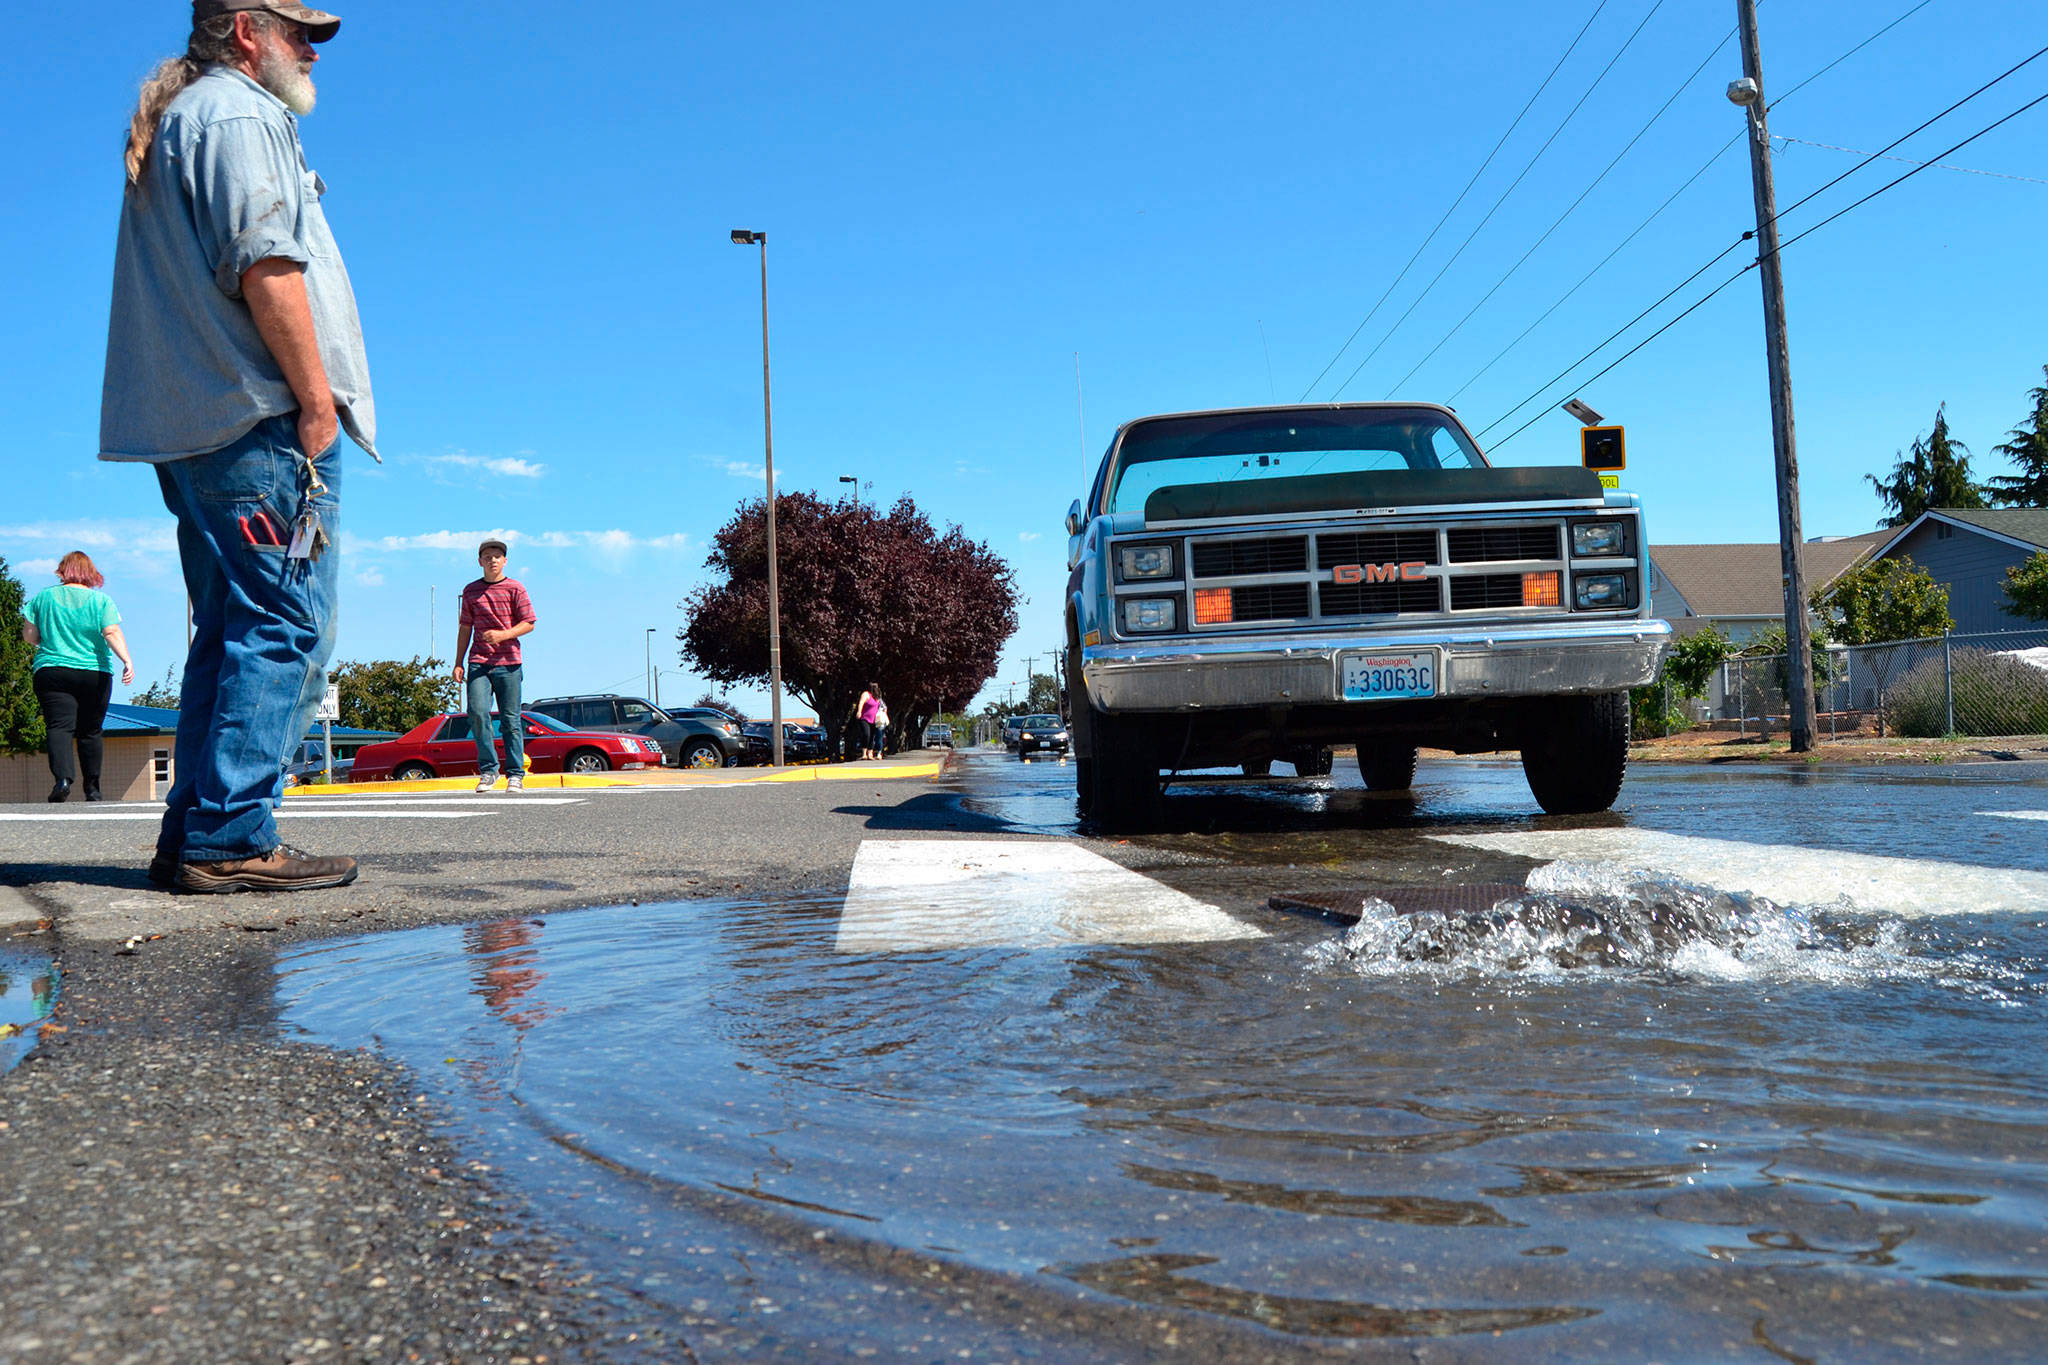 Construction on Fir Street by Sequim schools could start as soon as July 2018, say city staff, to repair water, sewer and irrigation lines, which should solve flooding issues like this scene in late August. Sequim Gazette file photo by Matthew Nash